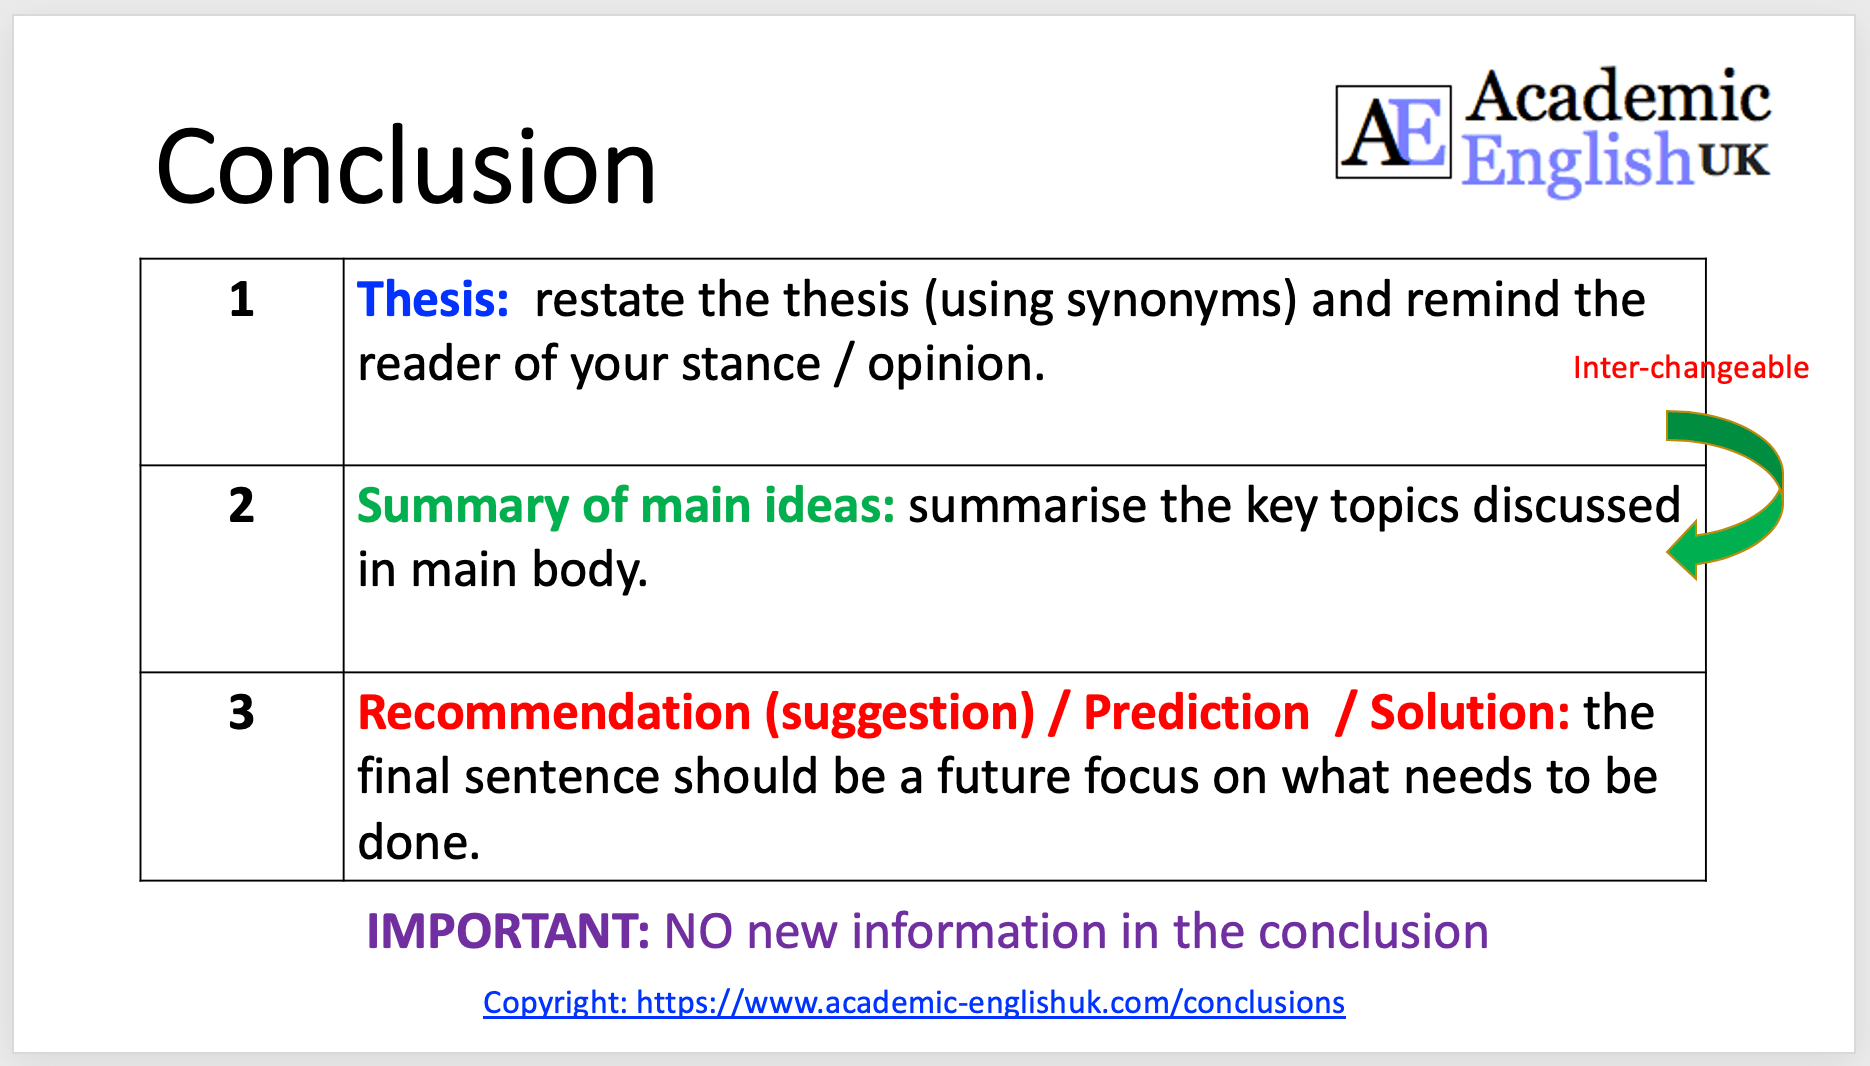 academic-conclusion-how-to-write-an-academic-conclusion